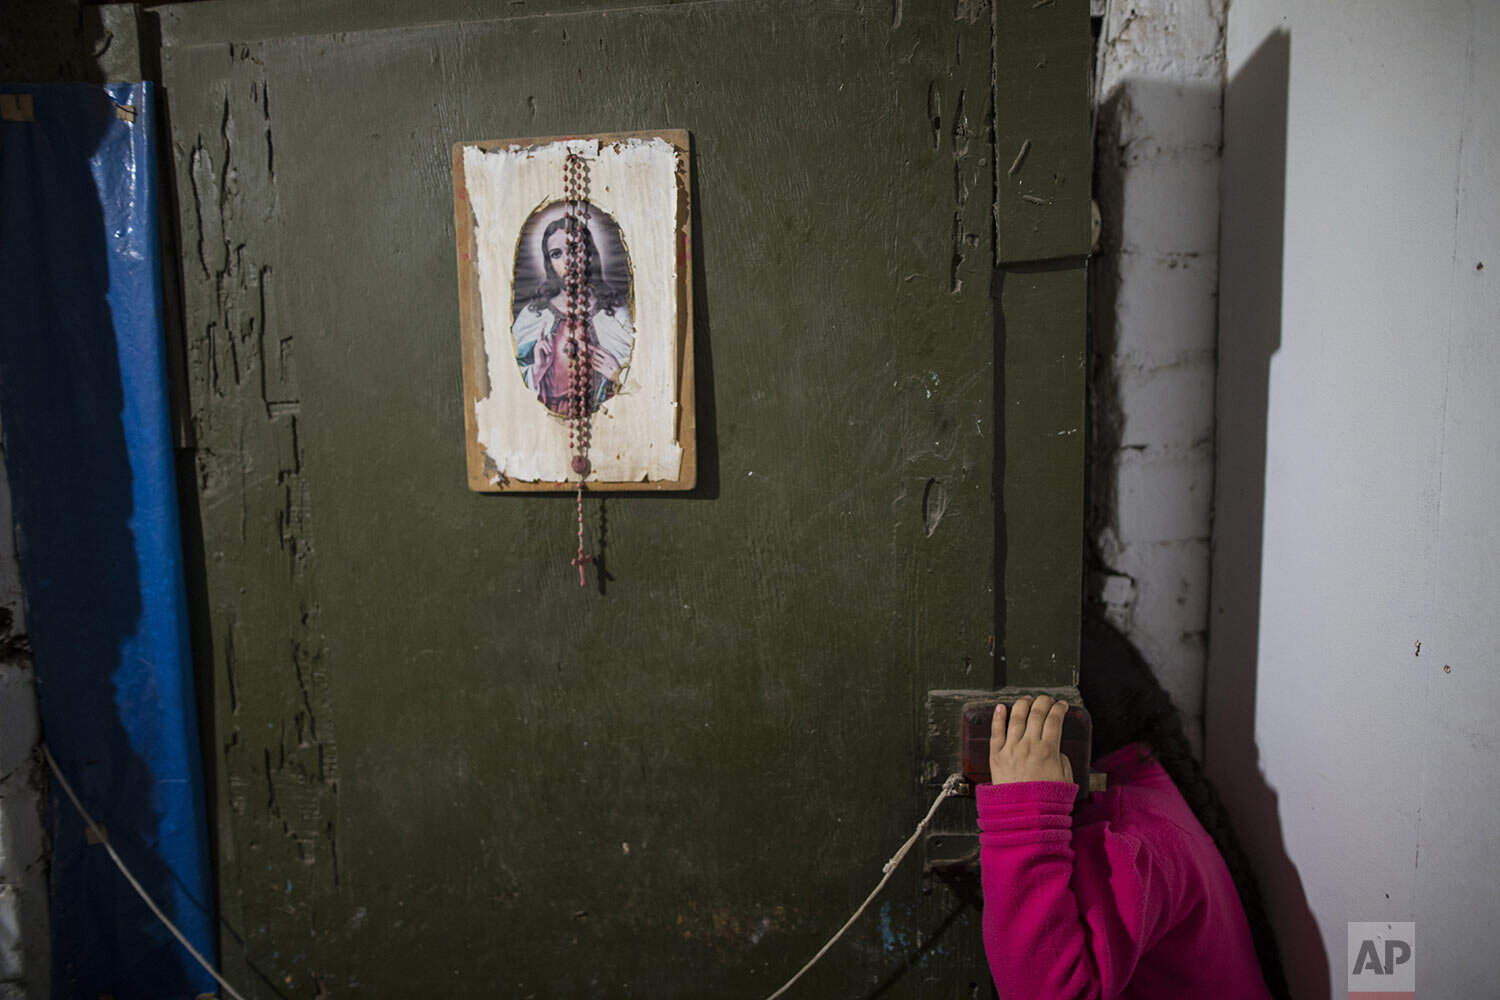  A child looks out her front door while Brother Ronald Marin pays a visit to pray with family members of COVID-19 victims, in Comas, on the outskirts of Lima, Peru, Thursday, July 23, 2020. (AP Photo/Rodrigo Abd) 